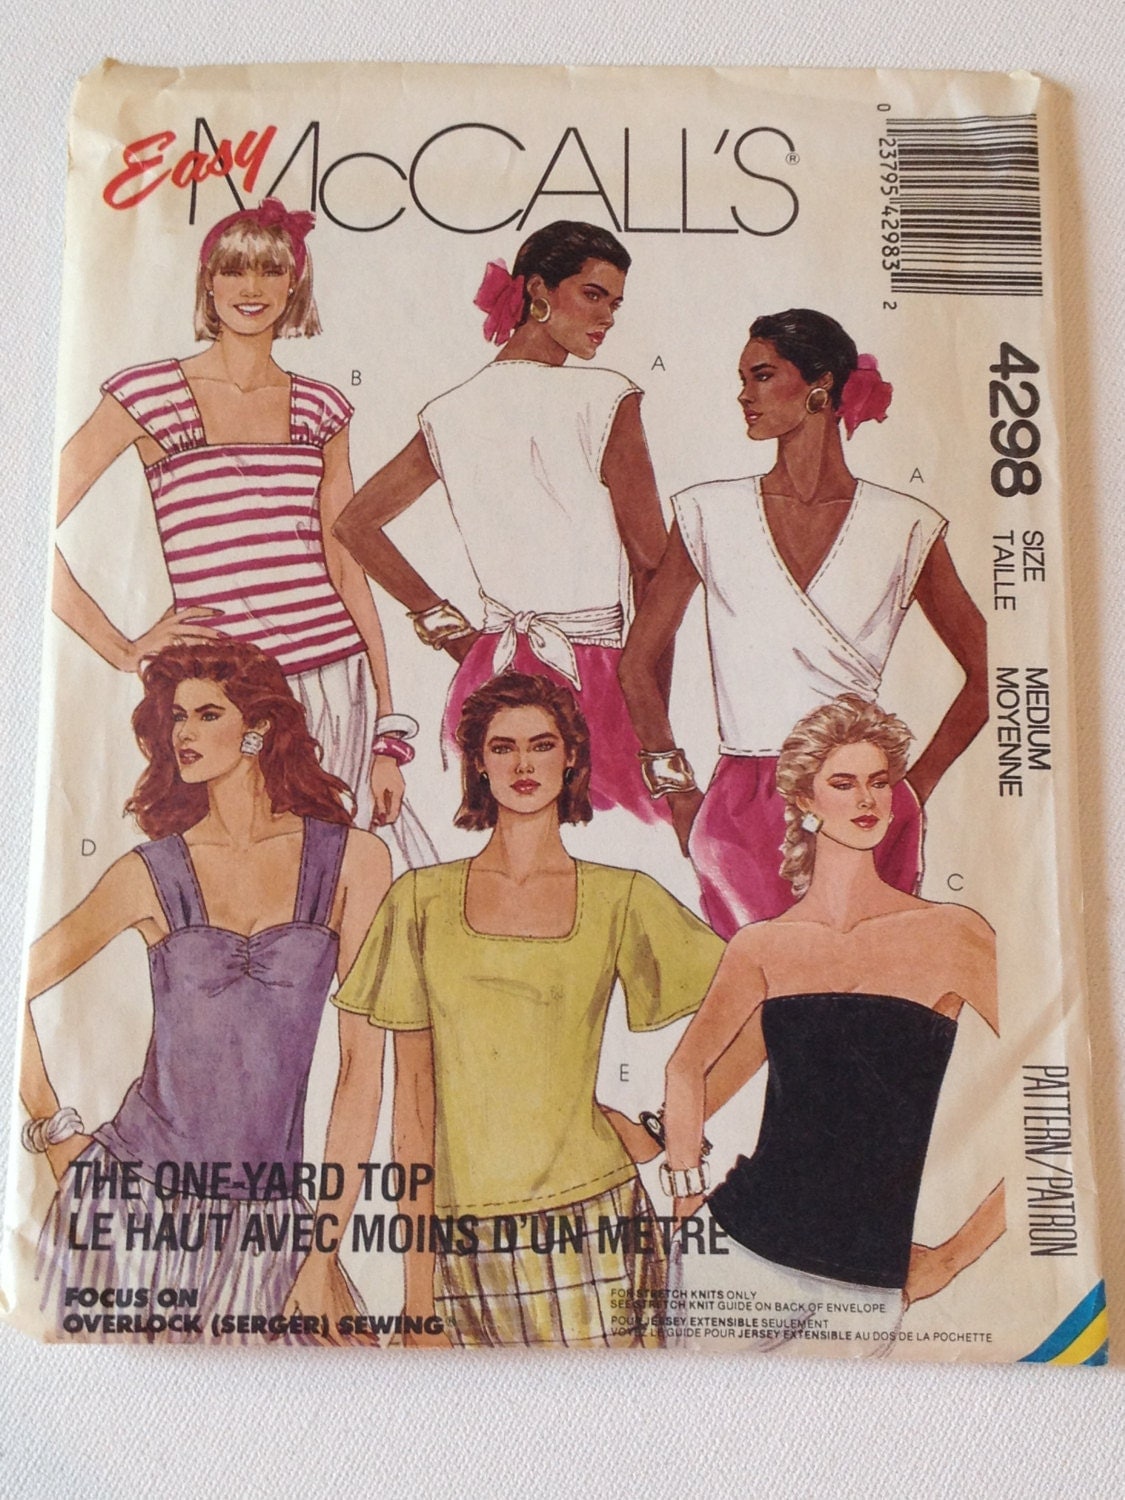 RARE 1988 Mccall's Sewing Pattern 4298 Misses Stretch Knit